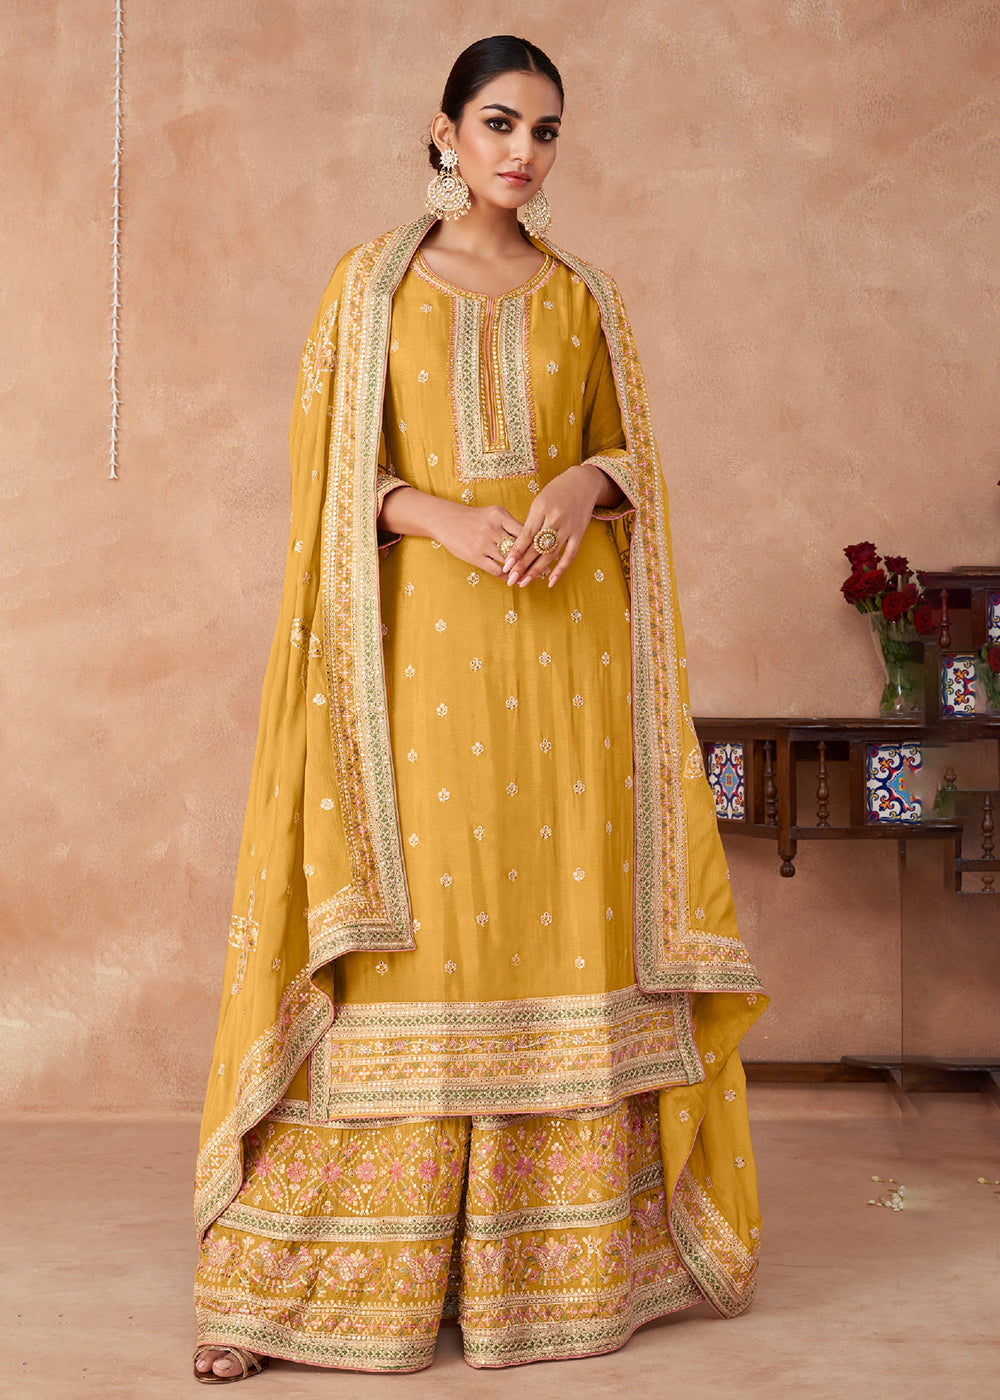 Shop Now Gorgeous Yellow Real Chinnon Embroidered Designer Sharara Suit Online at Empress Clothing in USA, UK, Canada, Italy & Worldwide. 